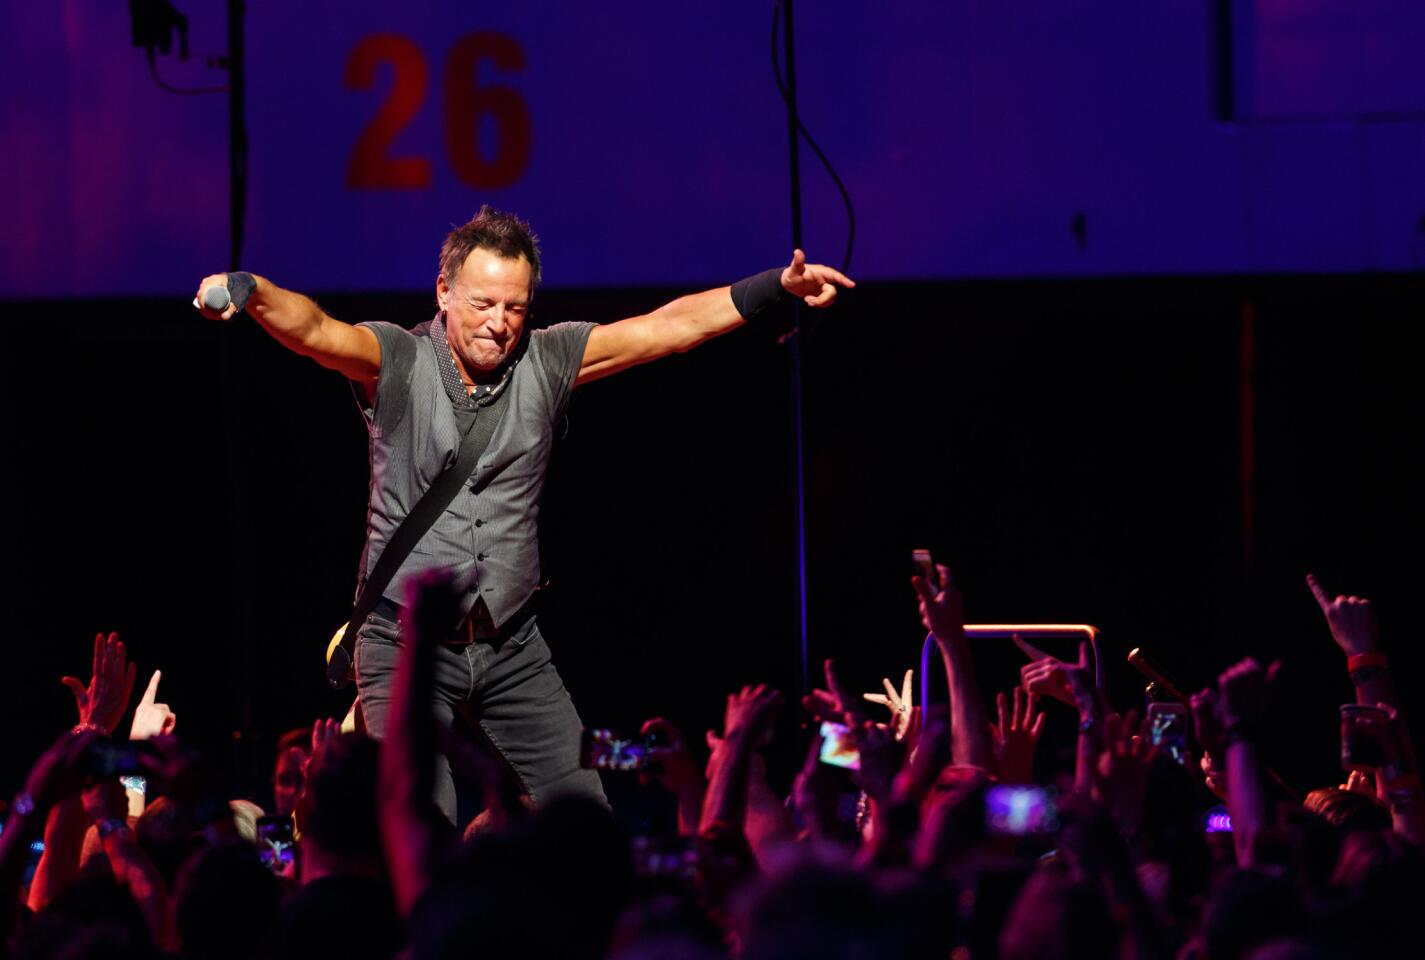 Bruce Springsteen & the E Street Band perform a grand finale at the Los Angeles Sports Arena before a wrecking ball pays the next visit to the historic venue.